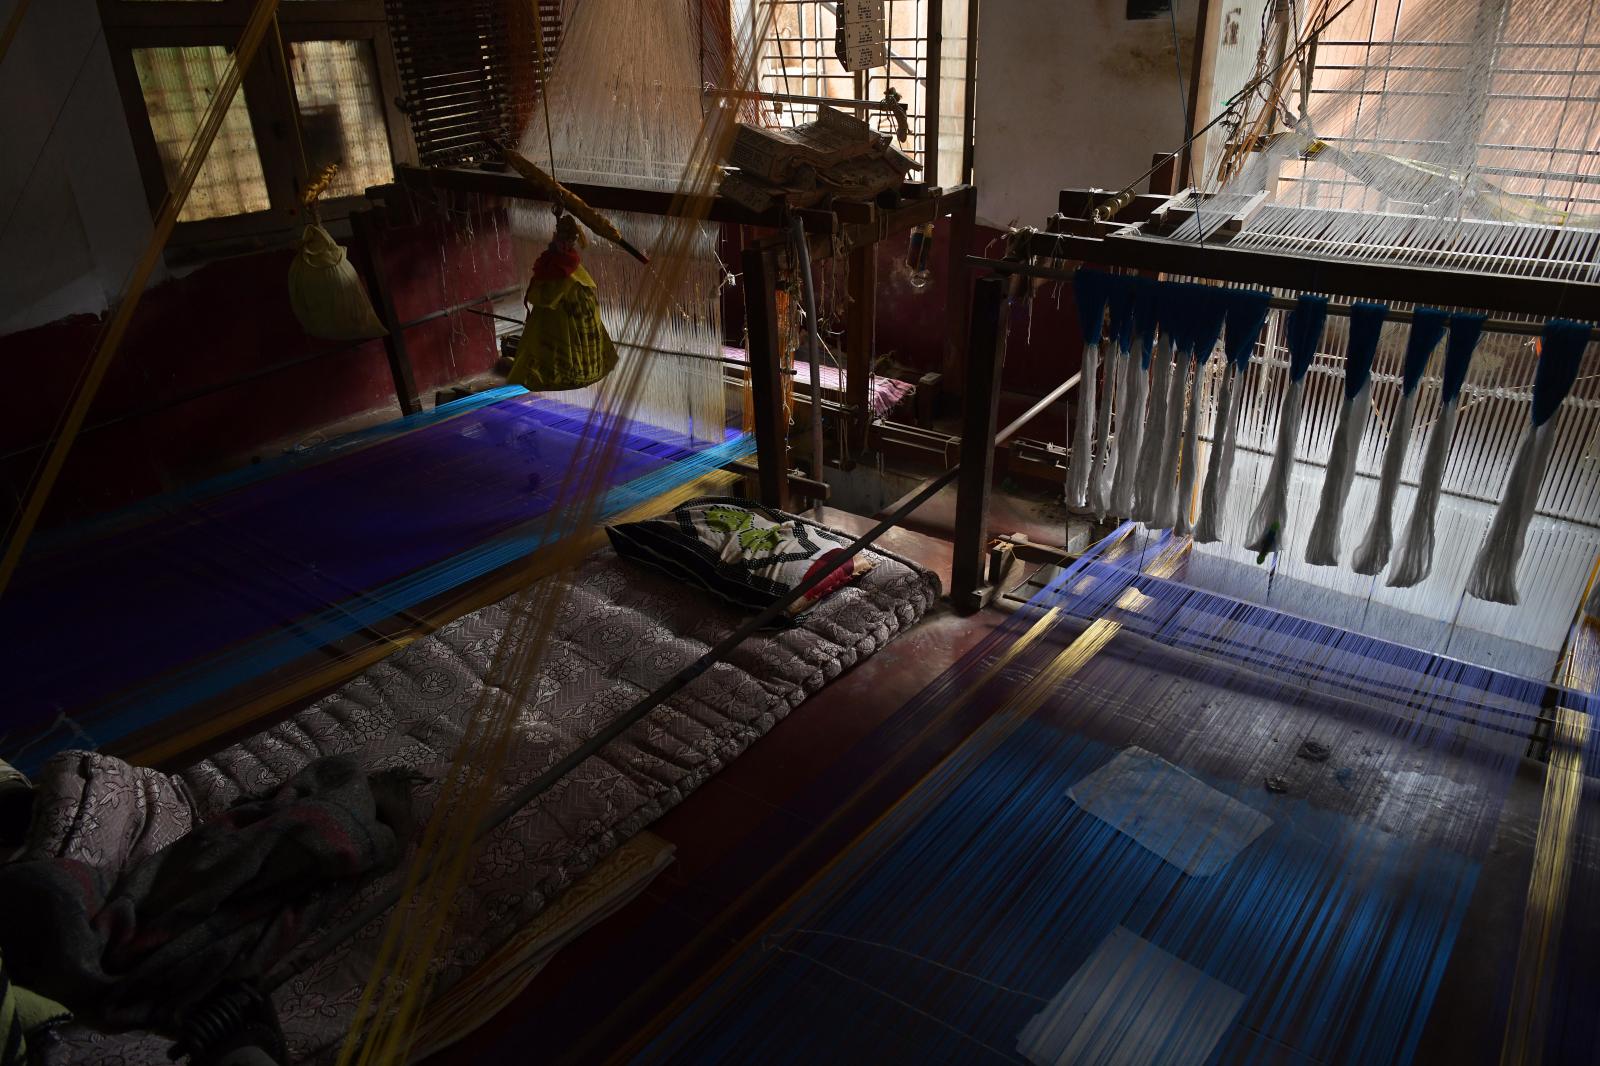 Story of the handloom industry after being struck by the COVID-19 virus in comparison with life before the virus.